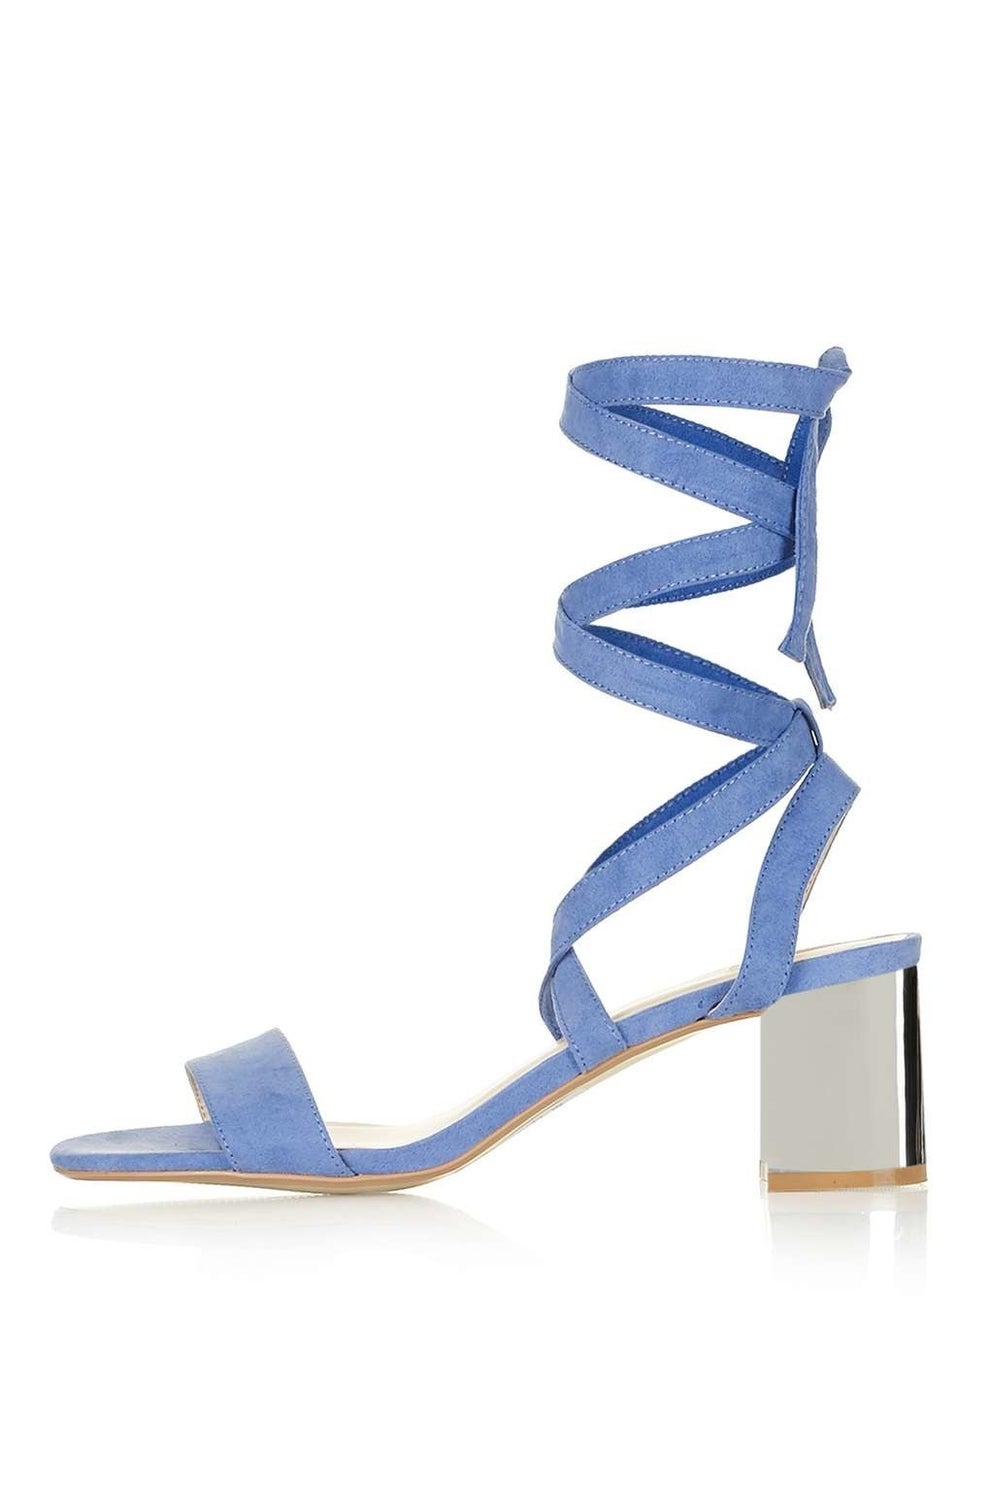 29 Pairs Of Awesome Sandals In Every Color Of The Rainbow